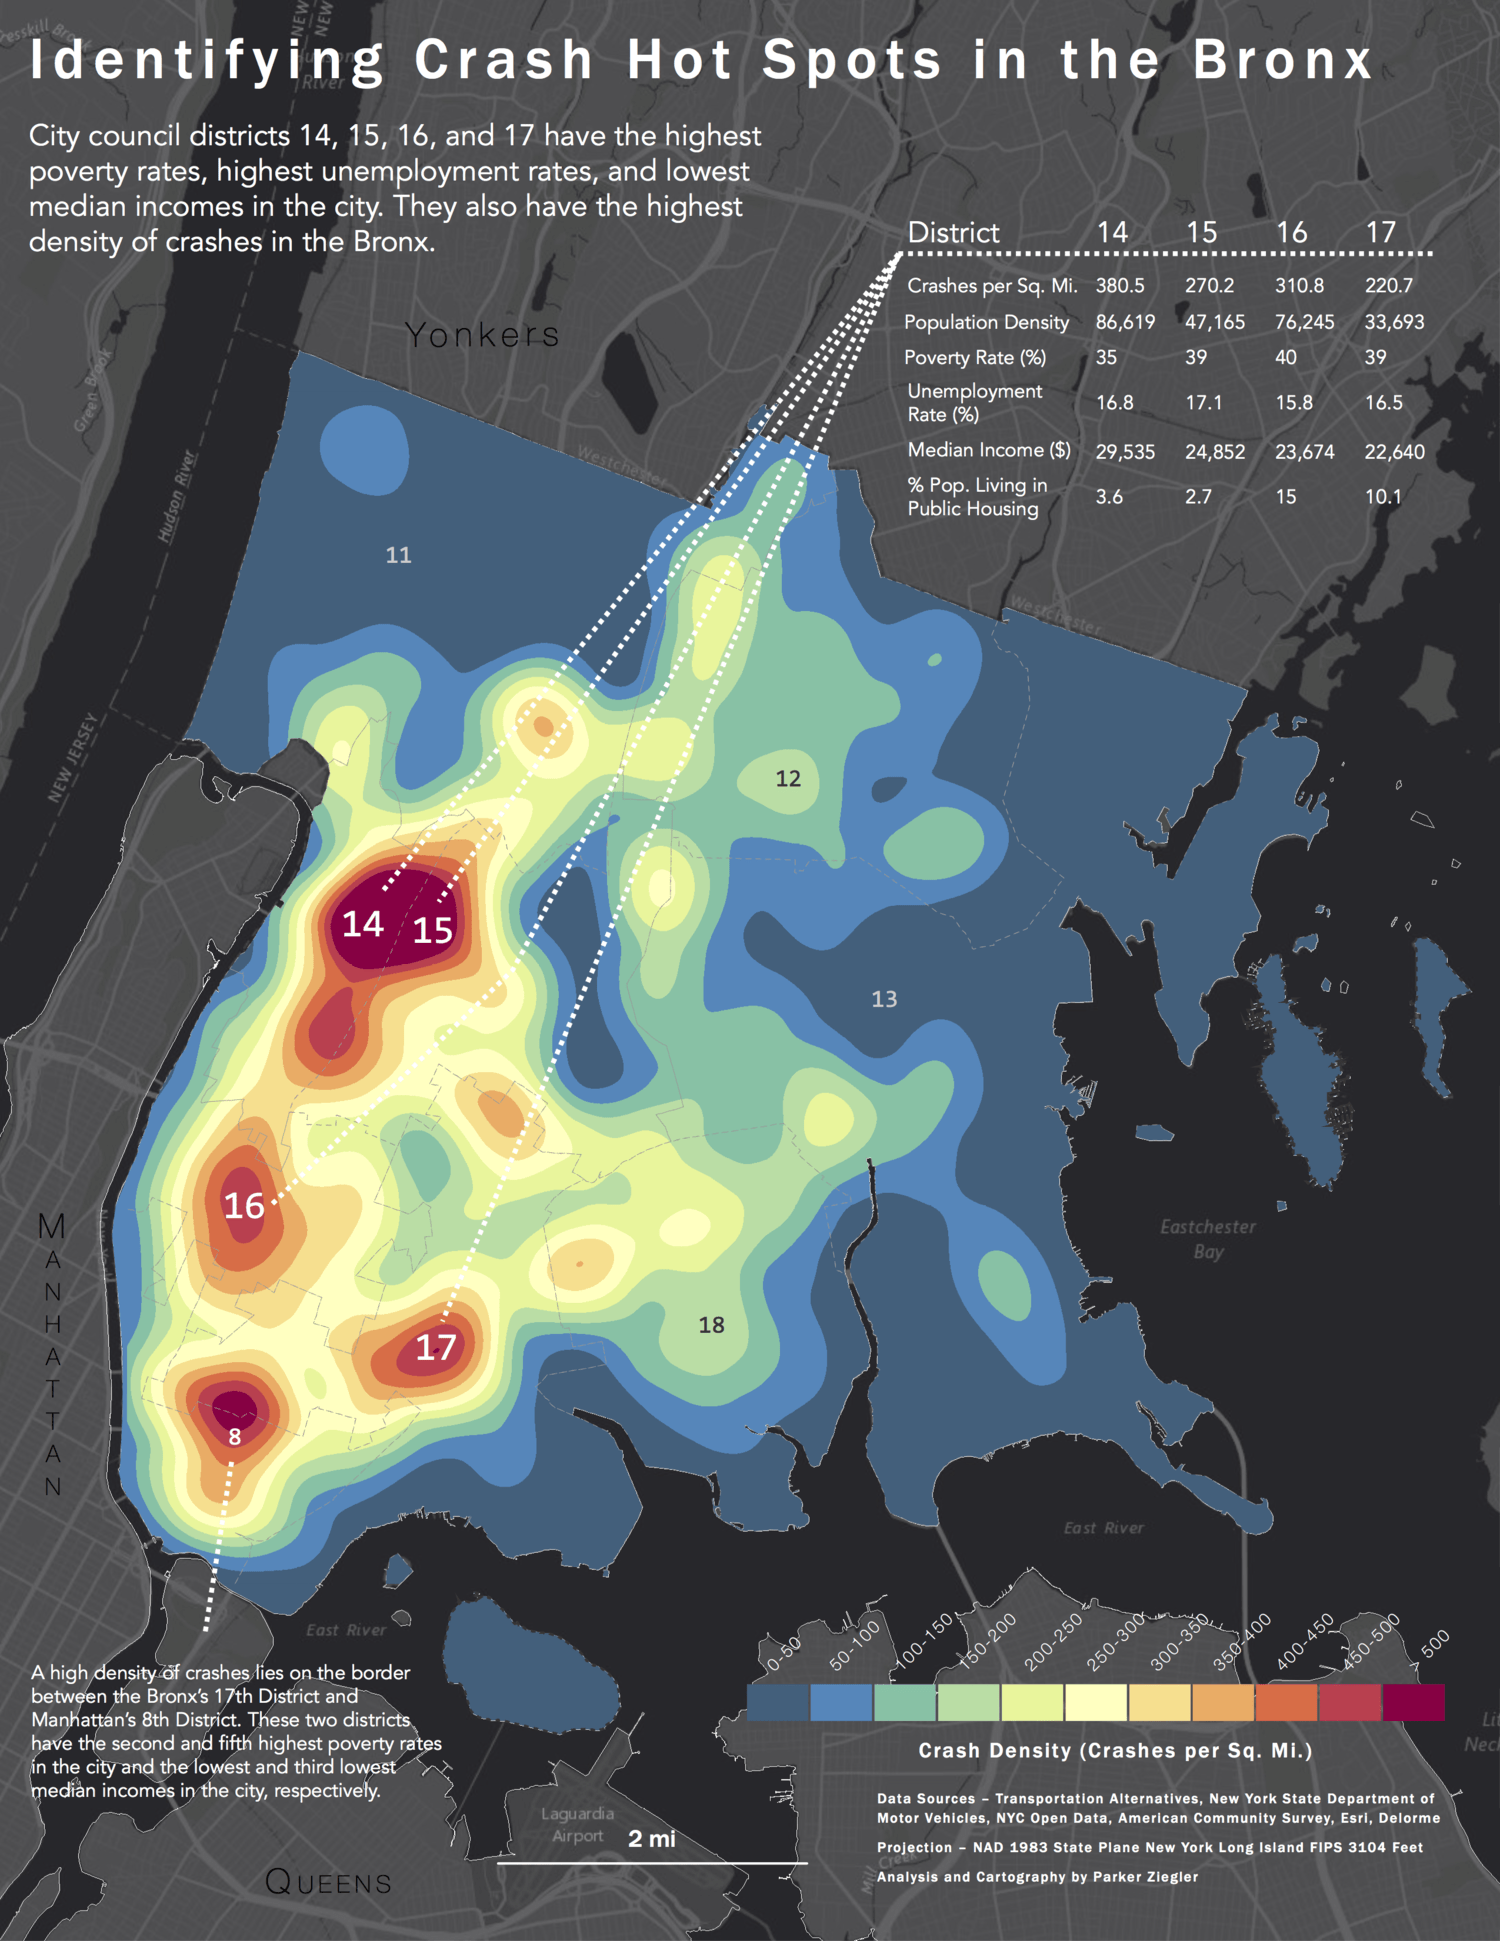 A heat map of traffic crashes in the Bronx, New York City between 2013 and 2015.